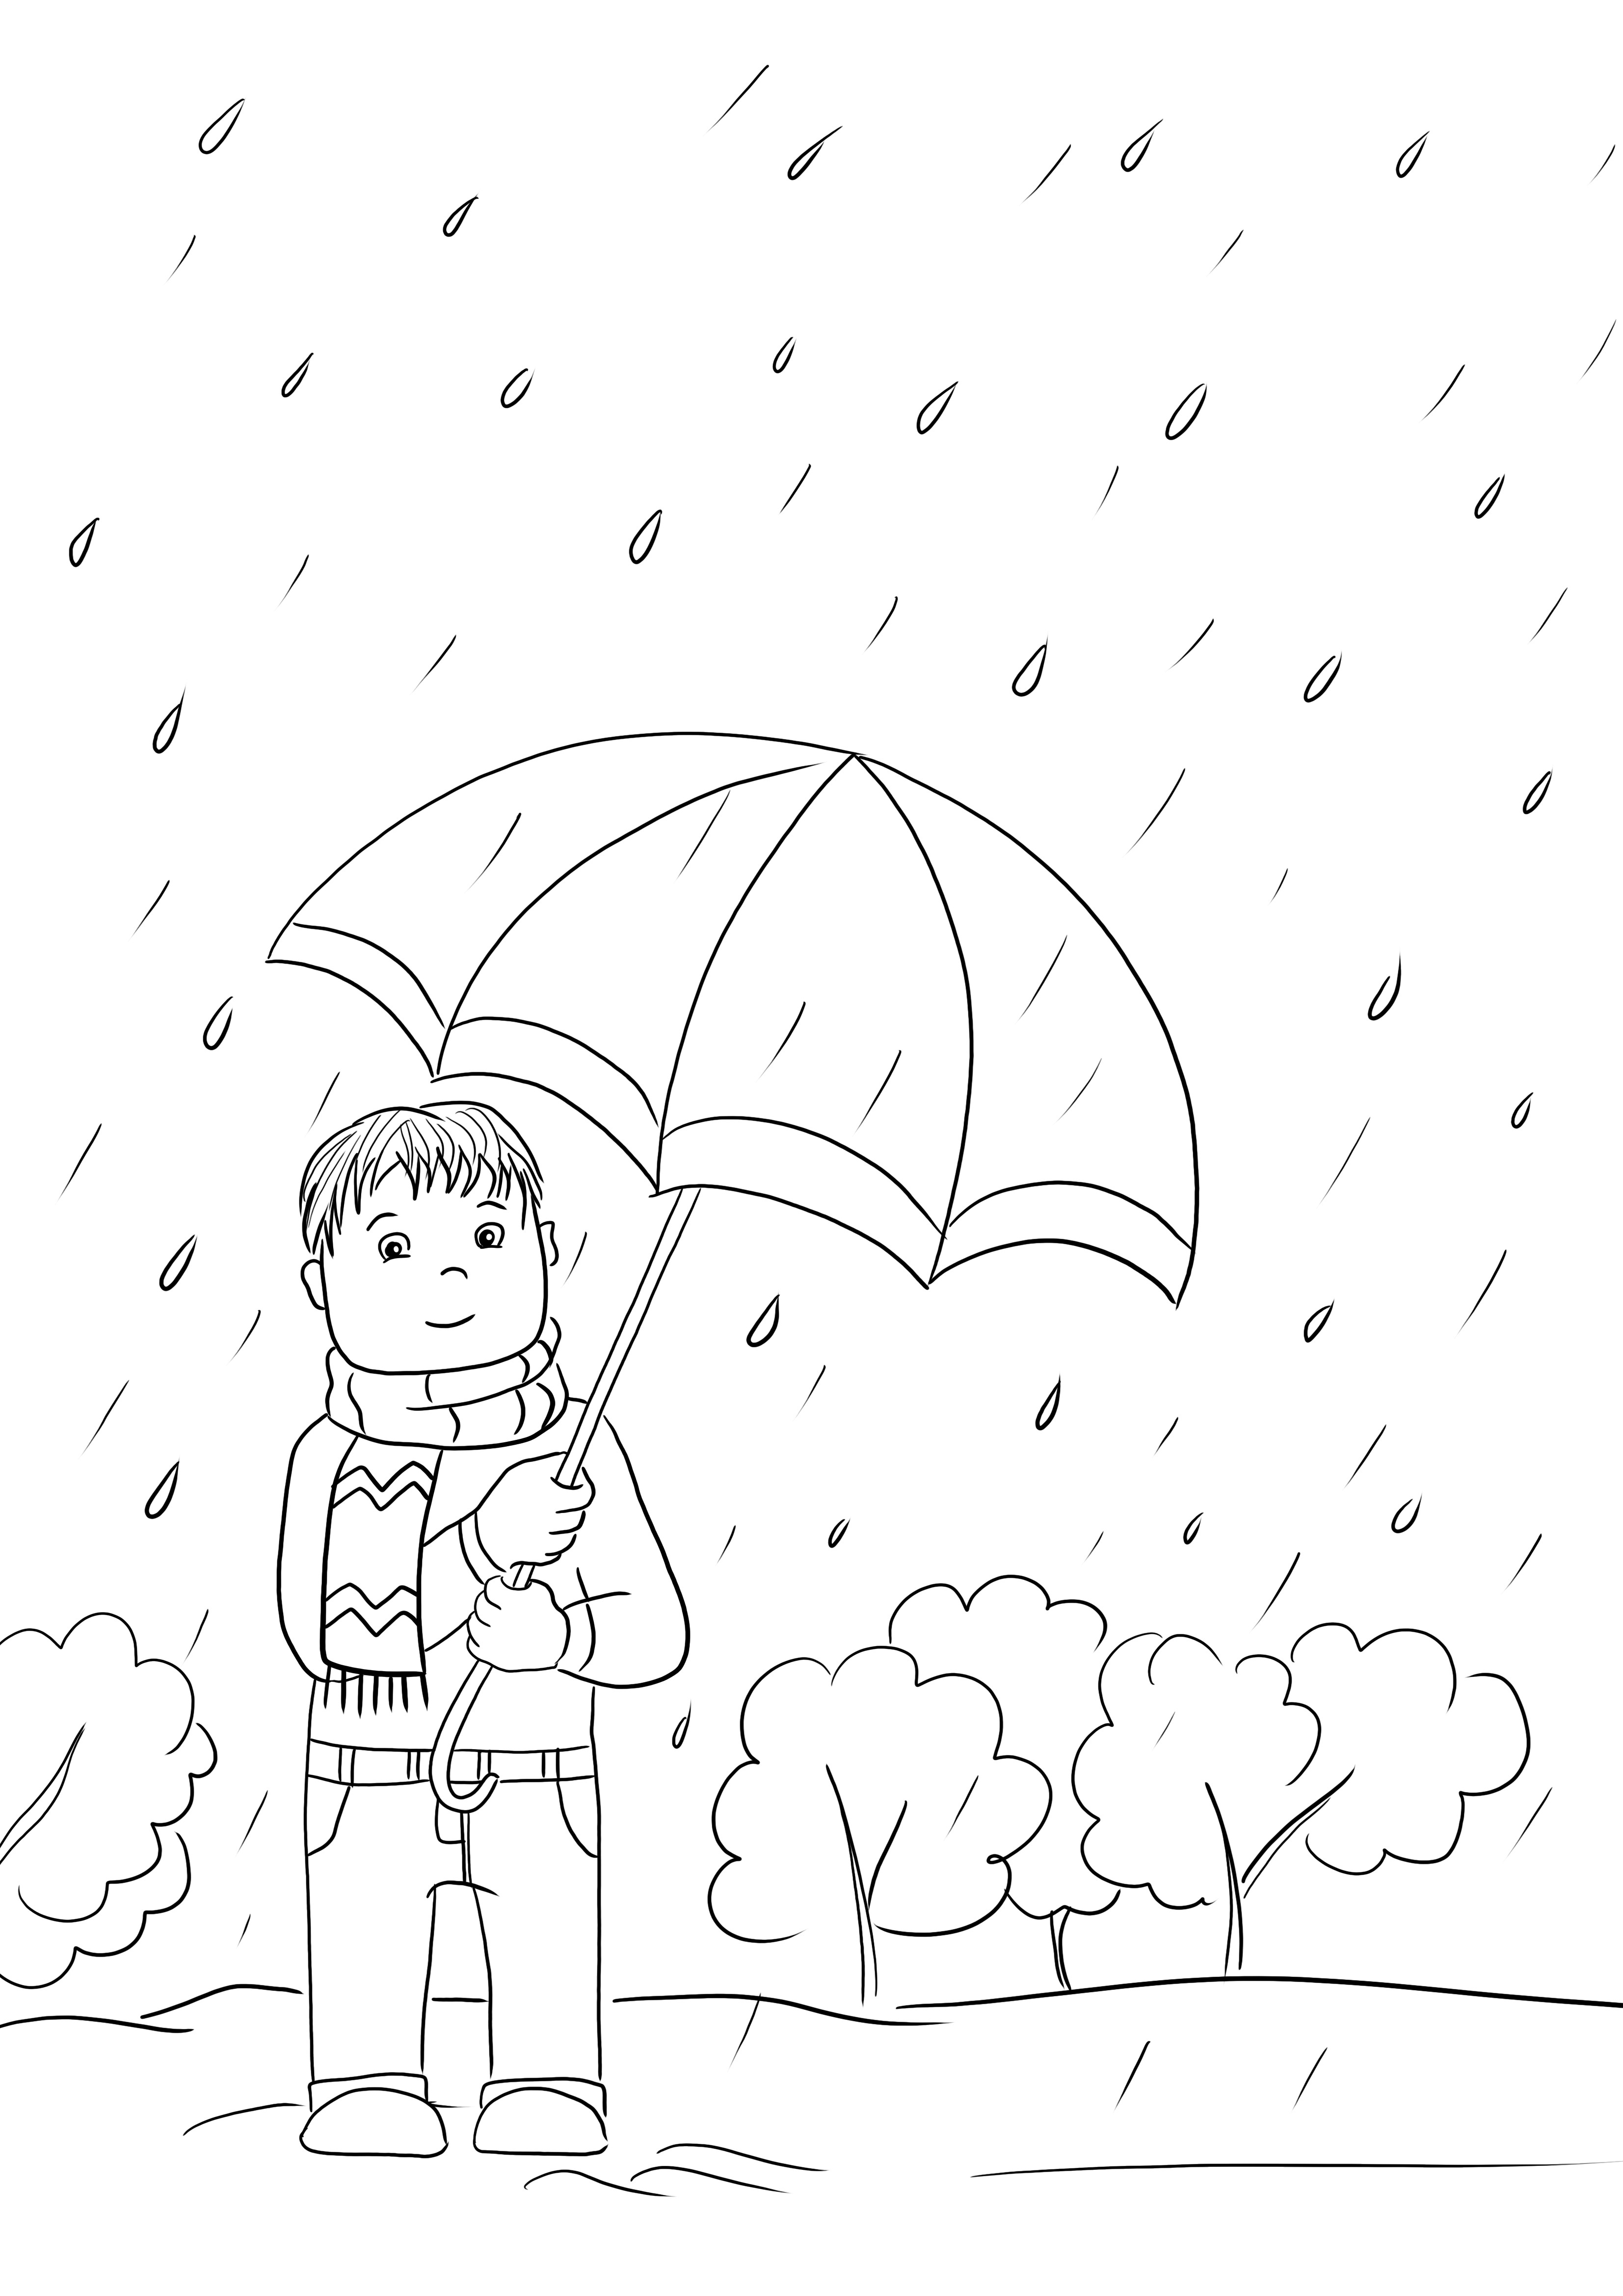 Rainy Day free for coloring page to print or save for later for kids